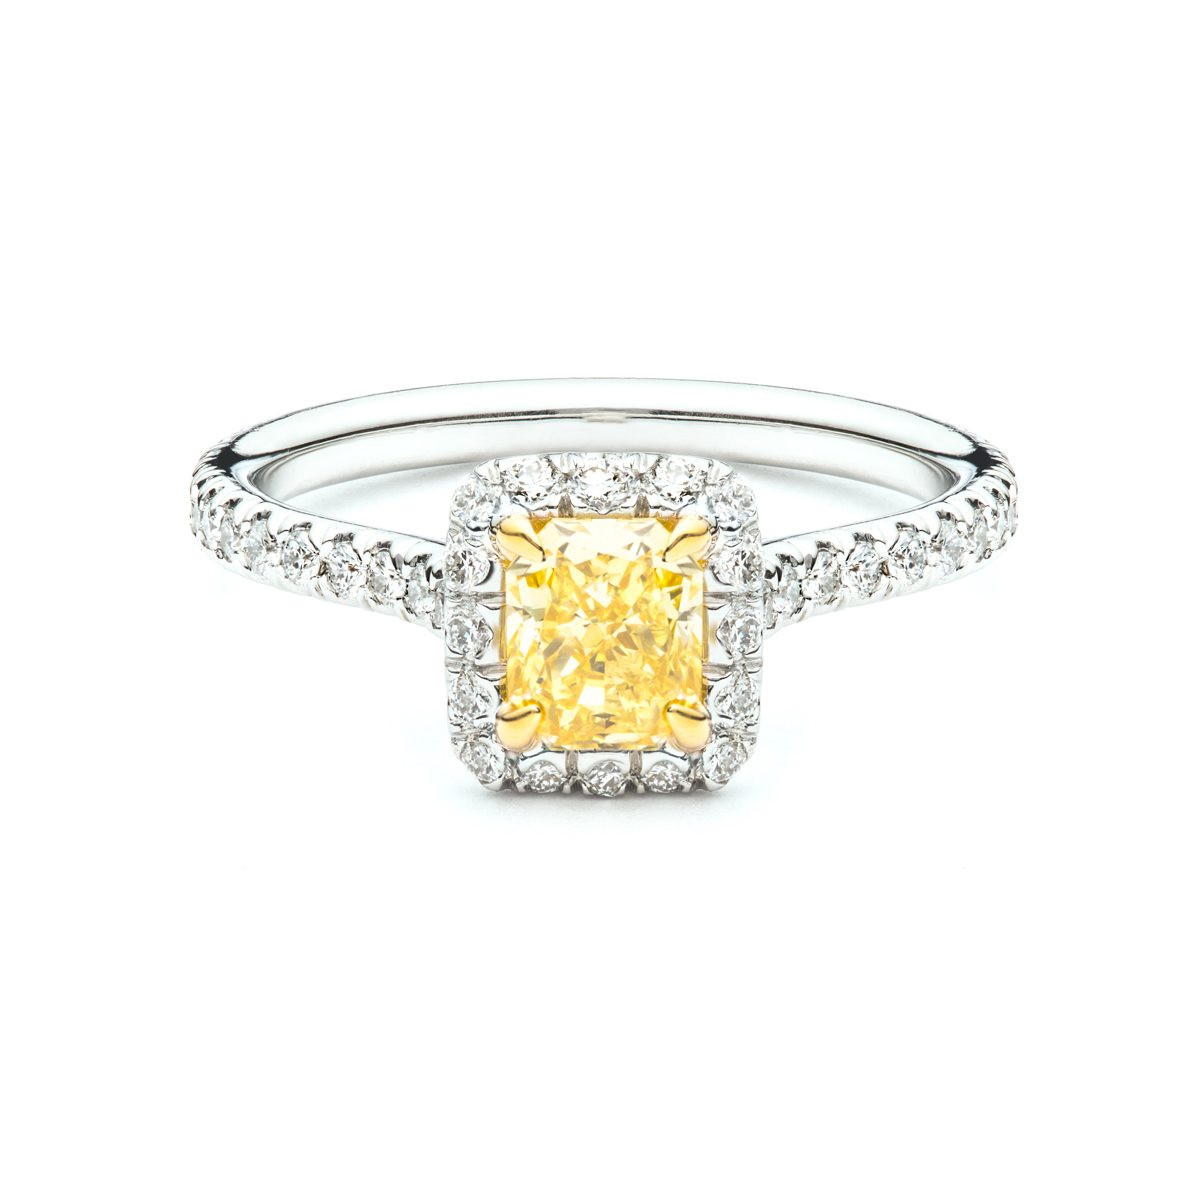 Yellow Diamond Engagement Ring
 Delicate Fancy Yellow Diamond Halo Engagement Ring